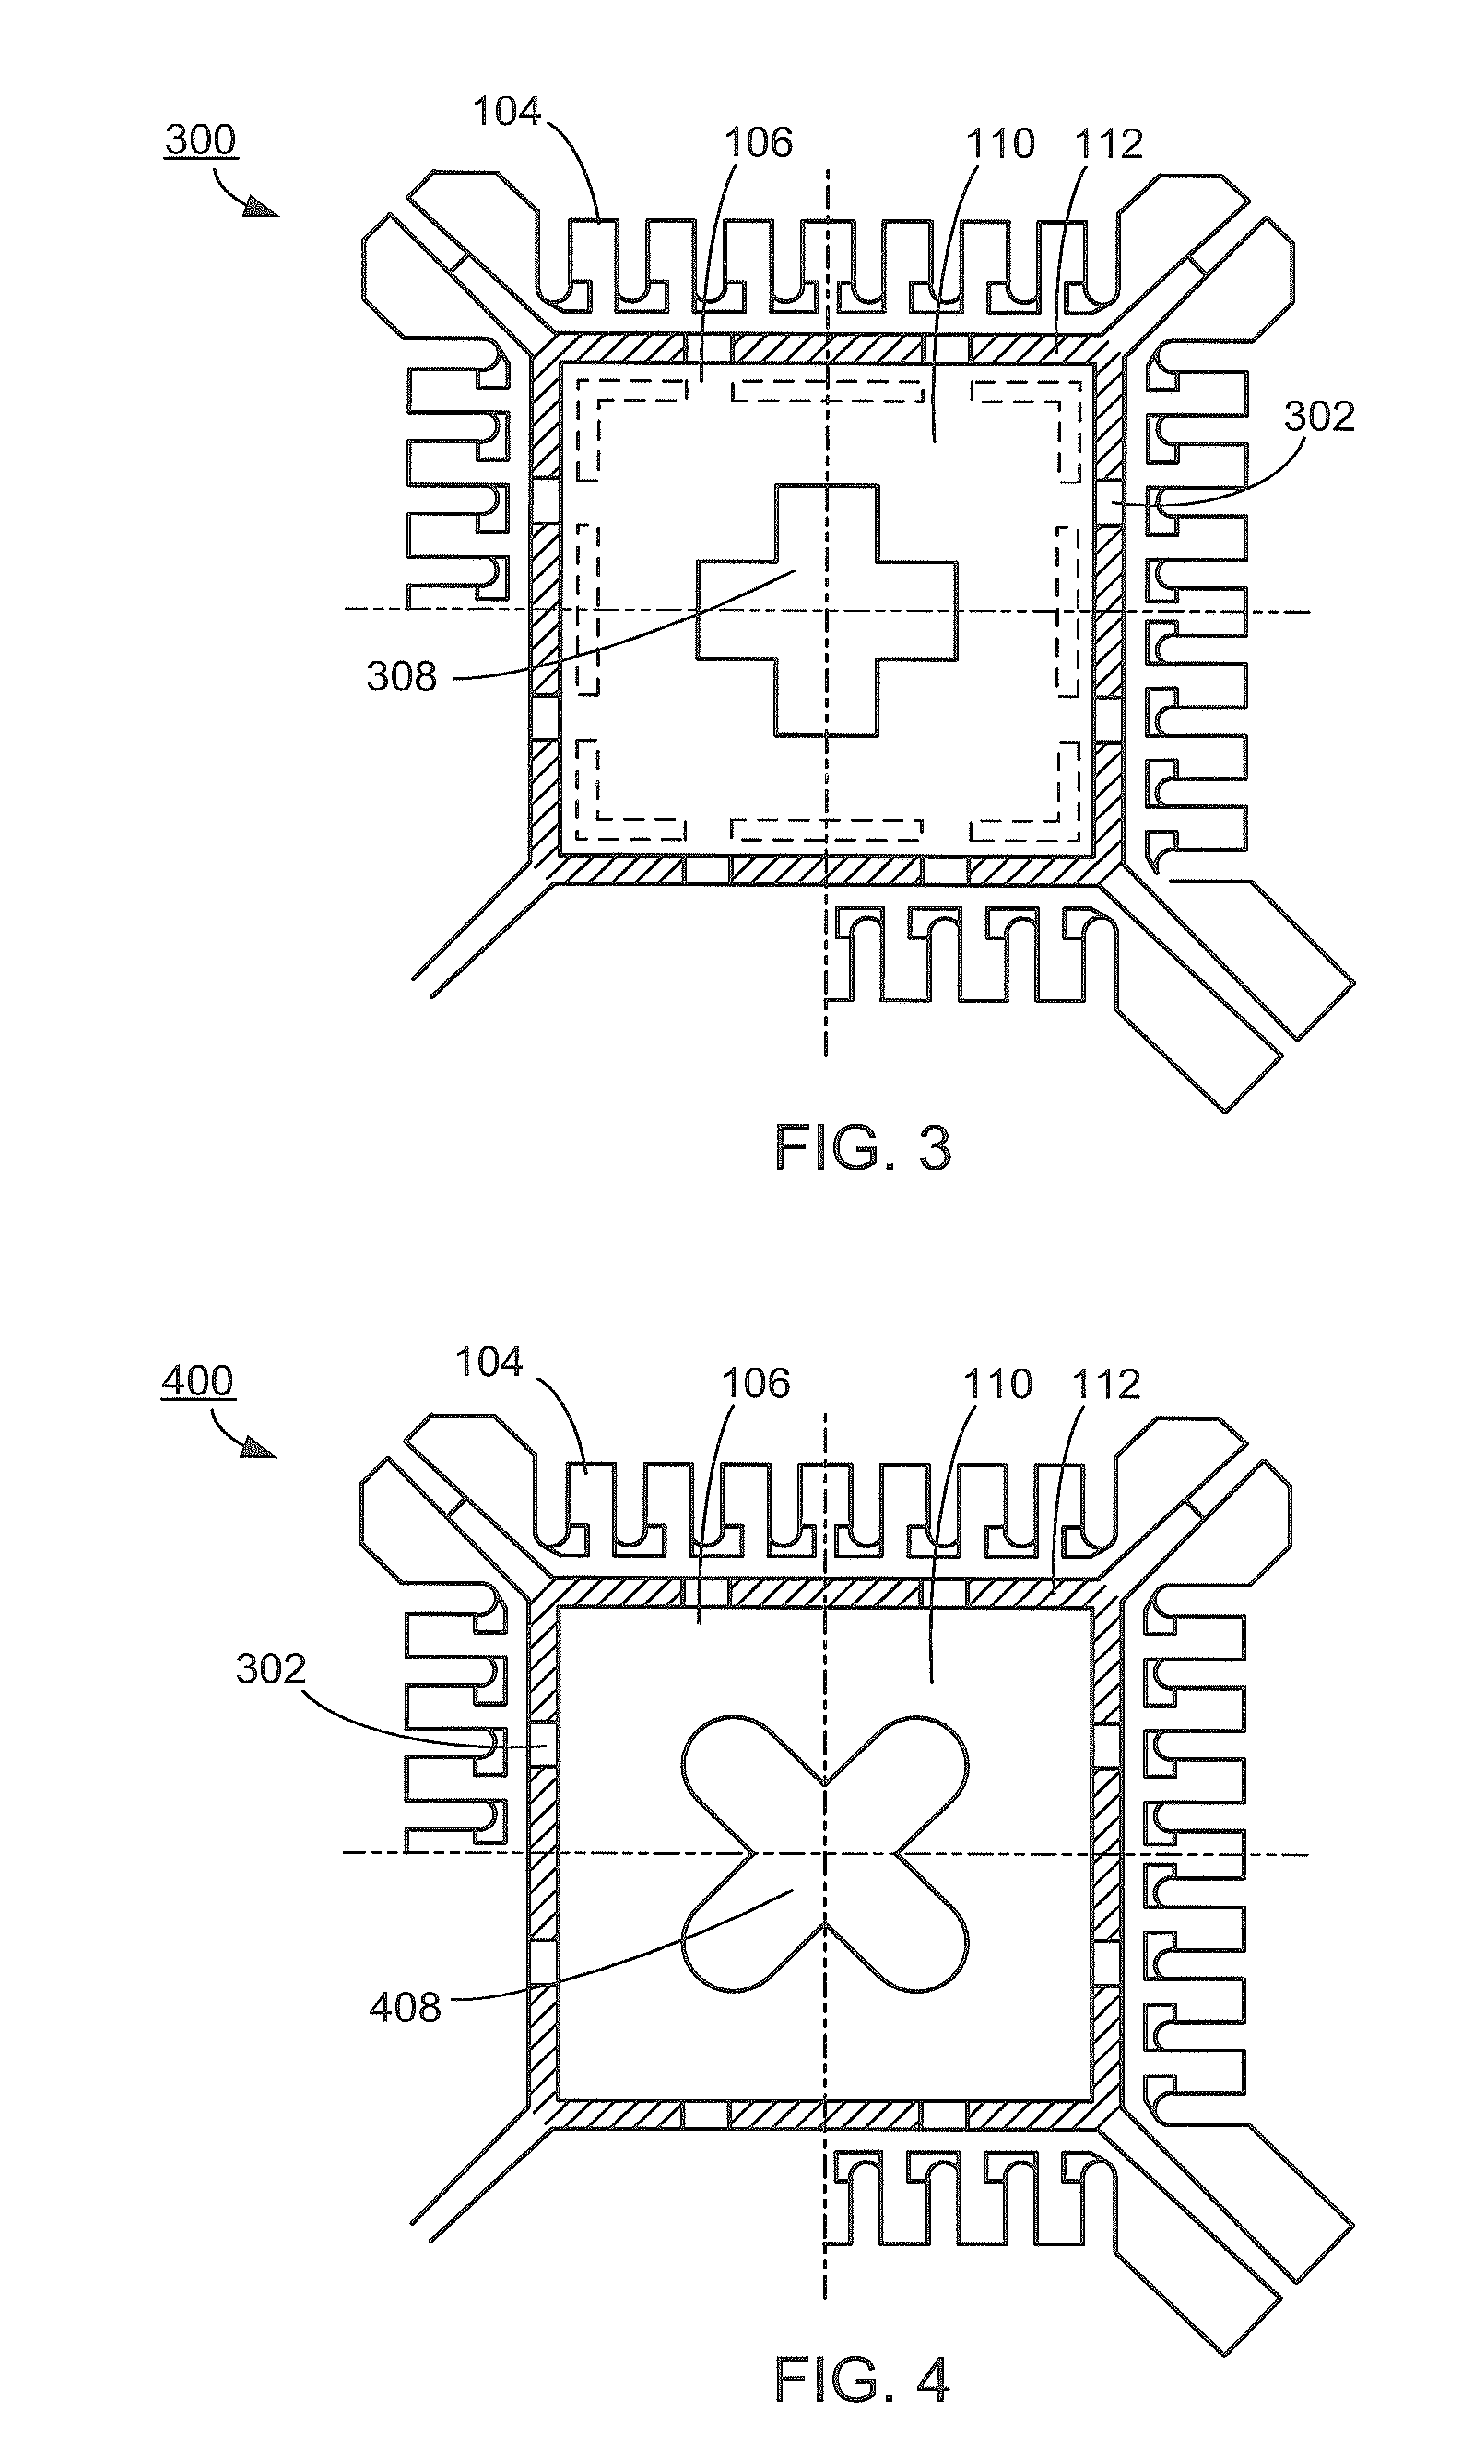 Integrated circuit package system with multi-surface die attach pad